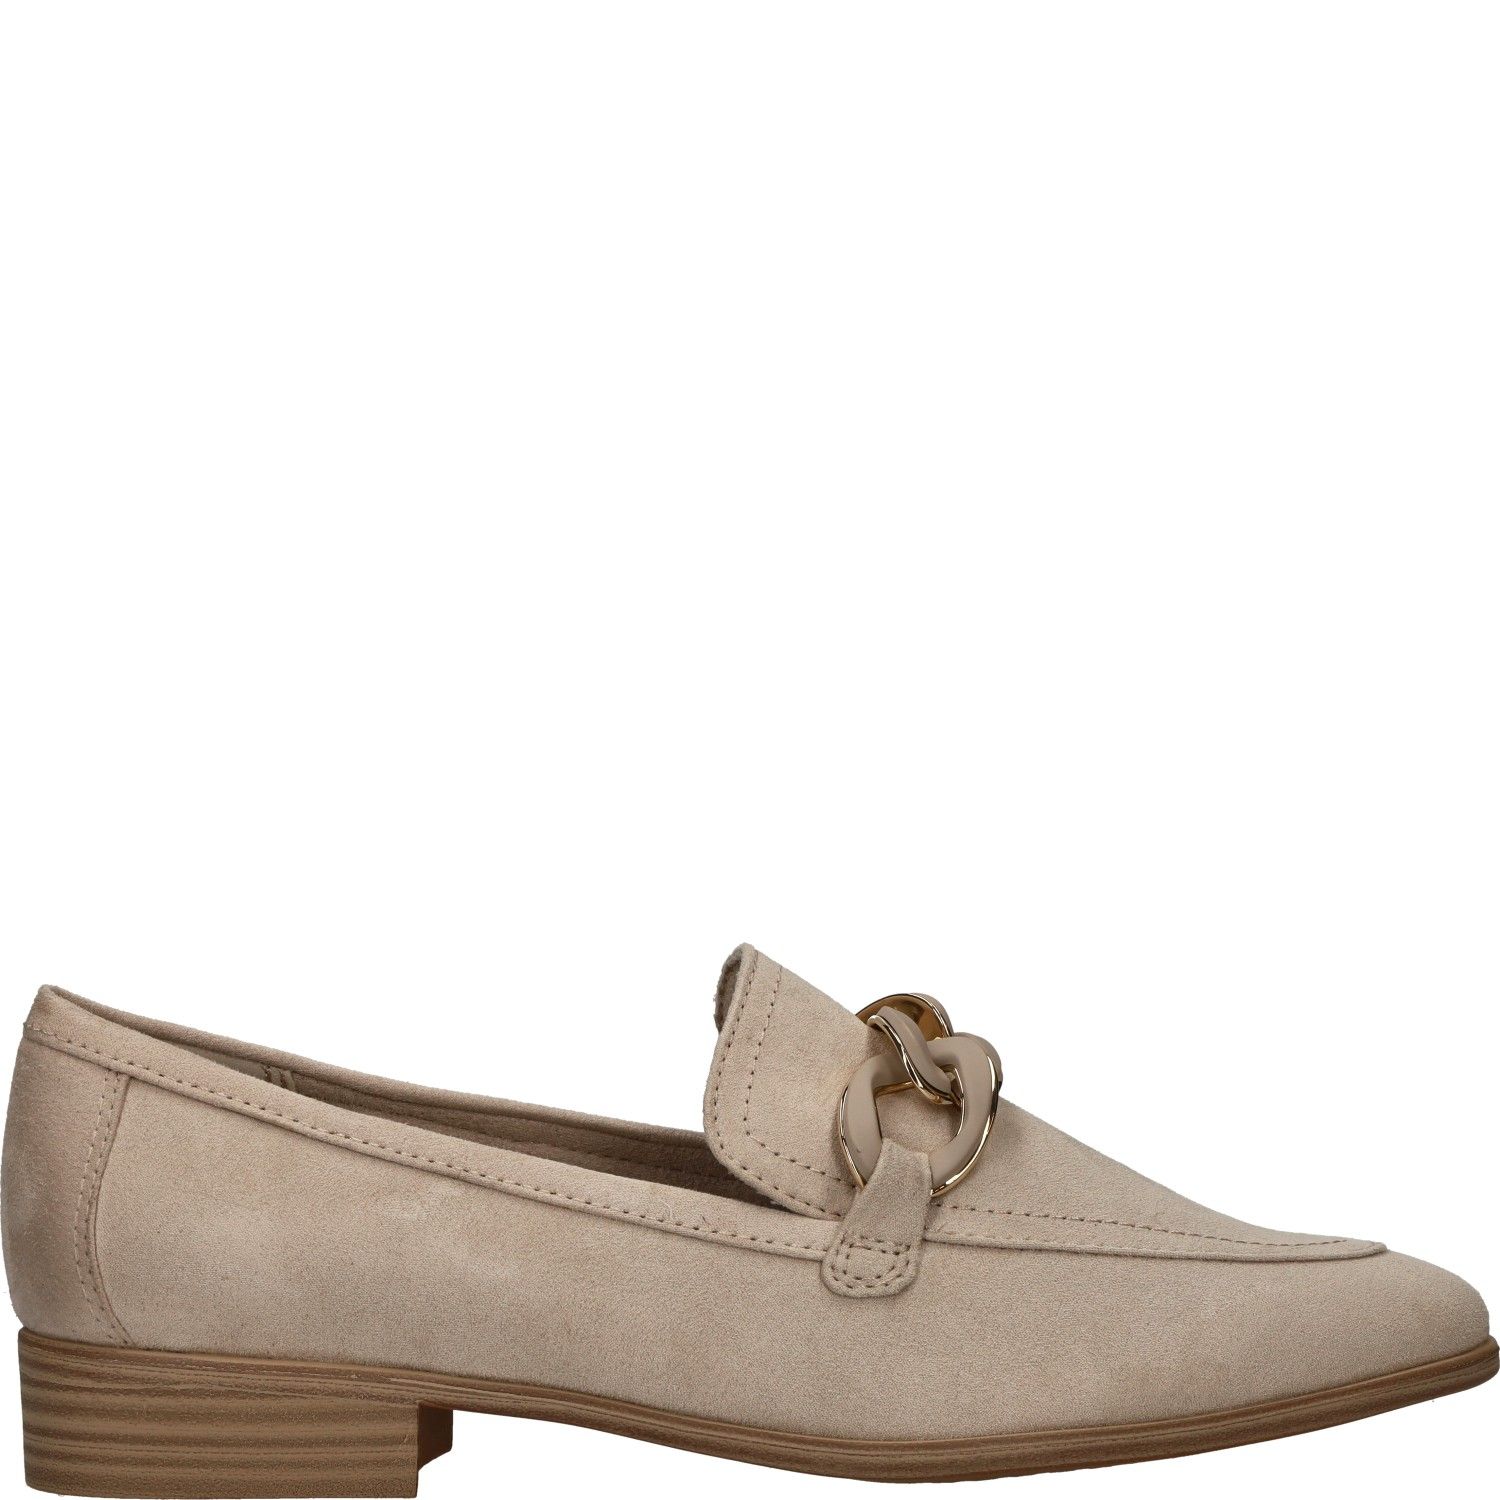 Marco tozzi Loafer Dames Beige